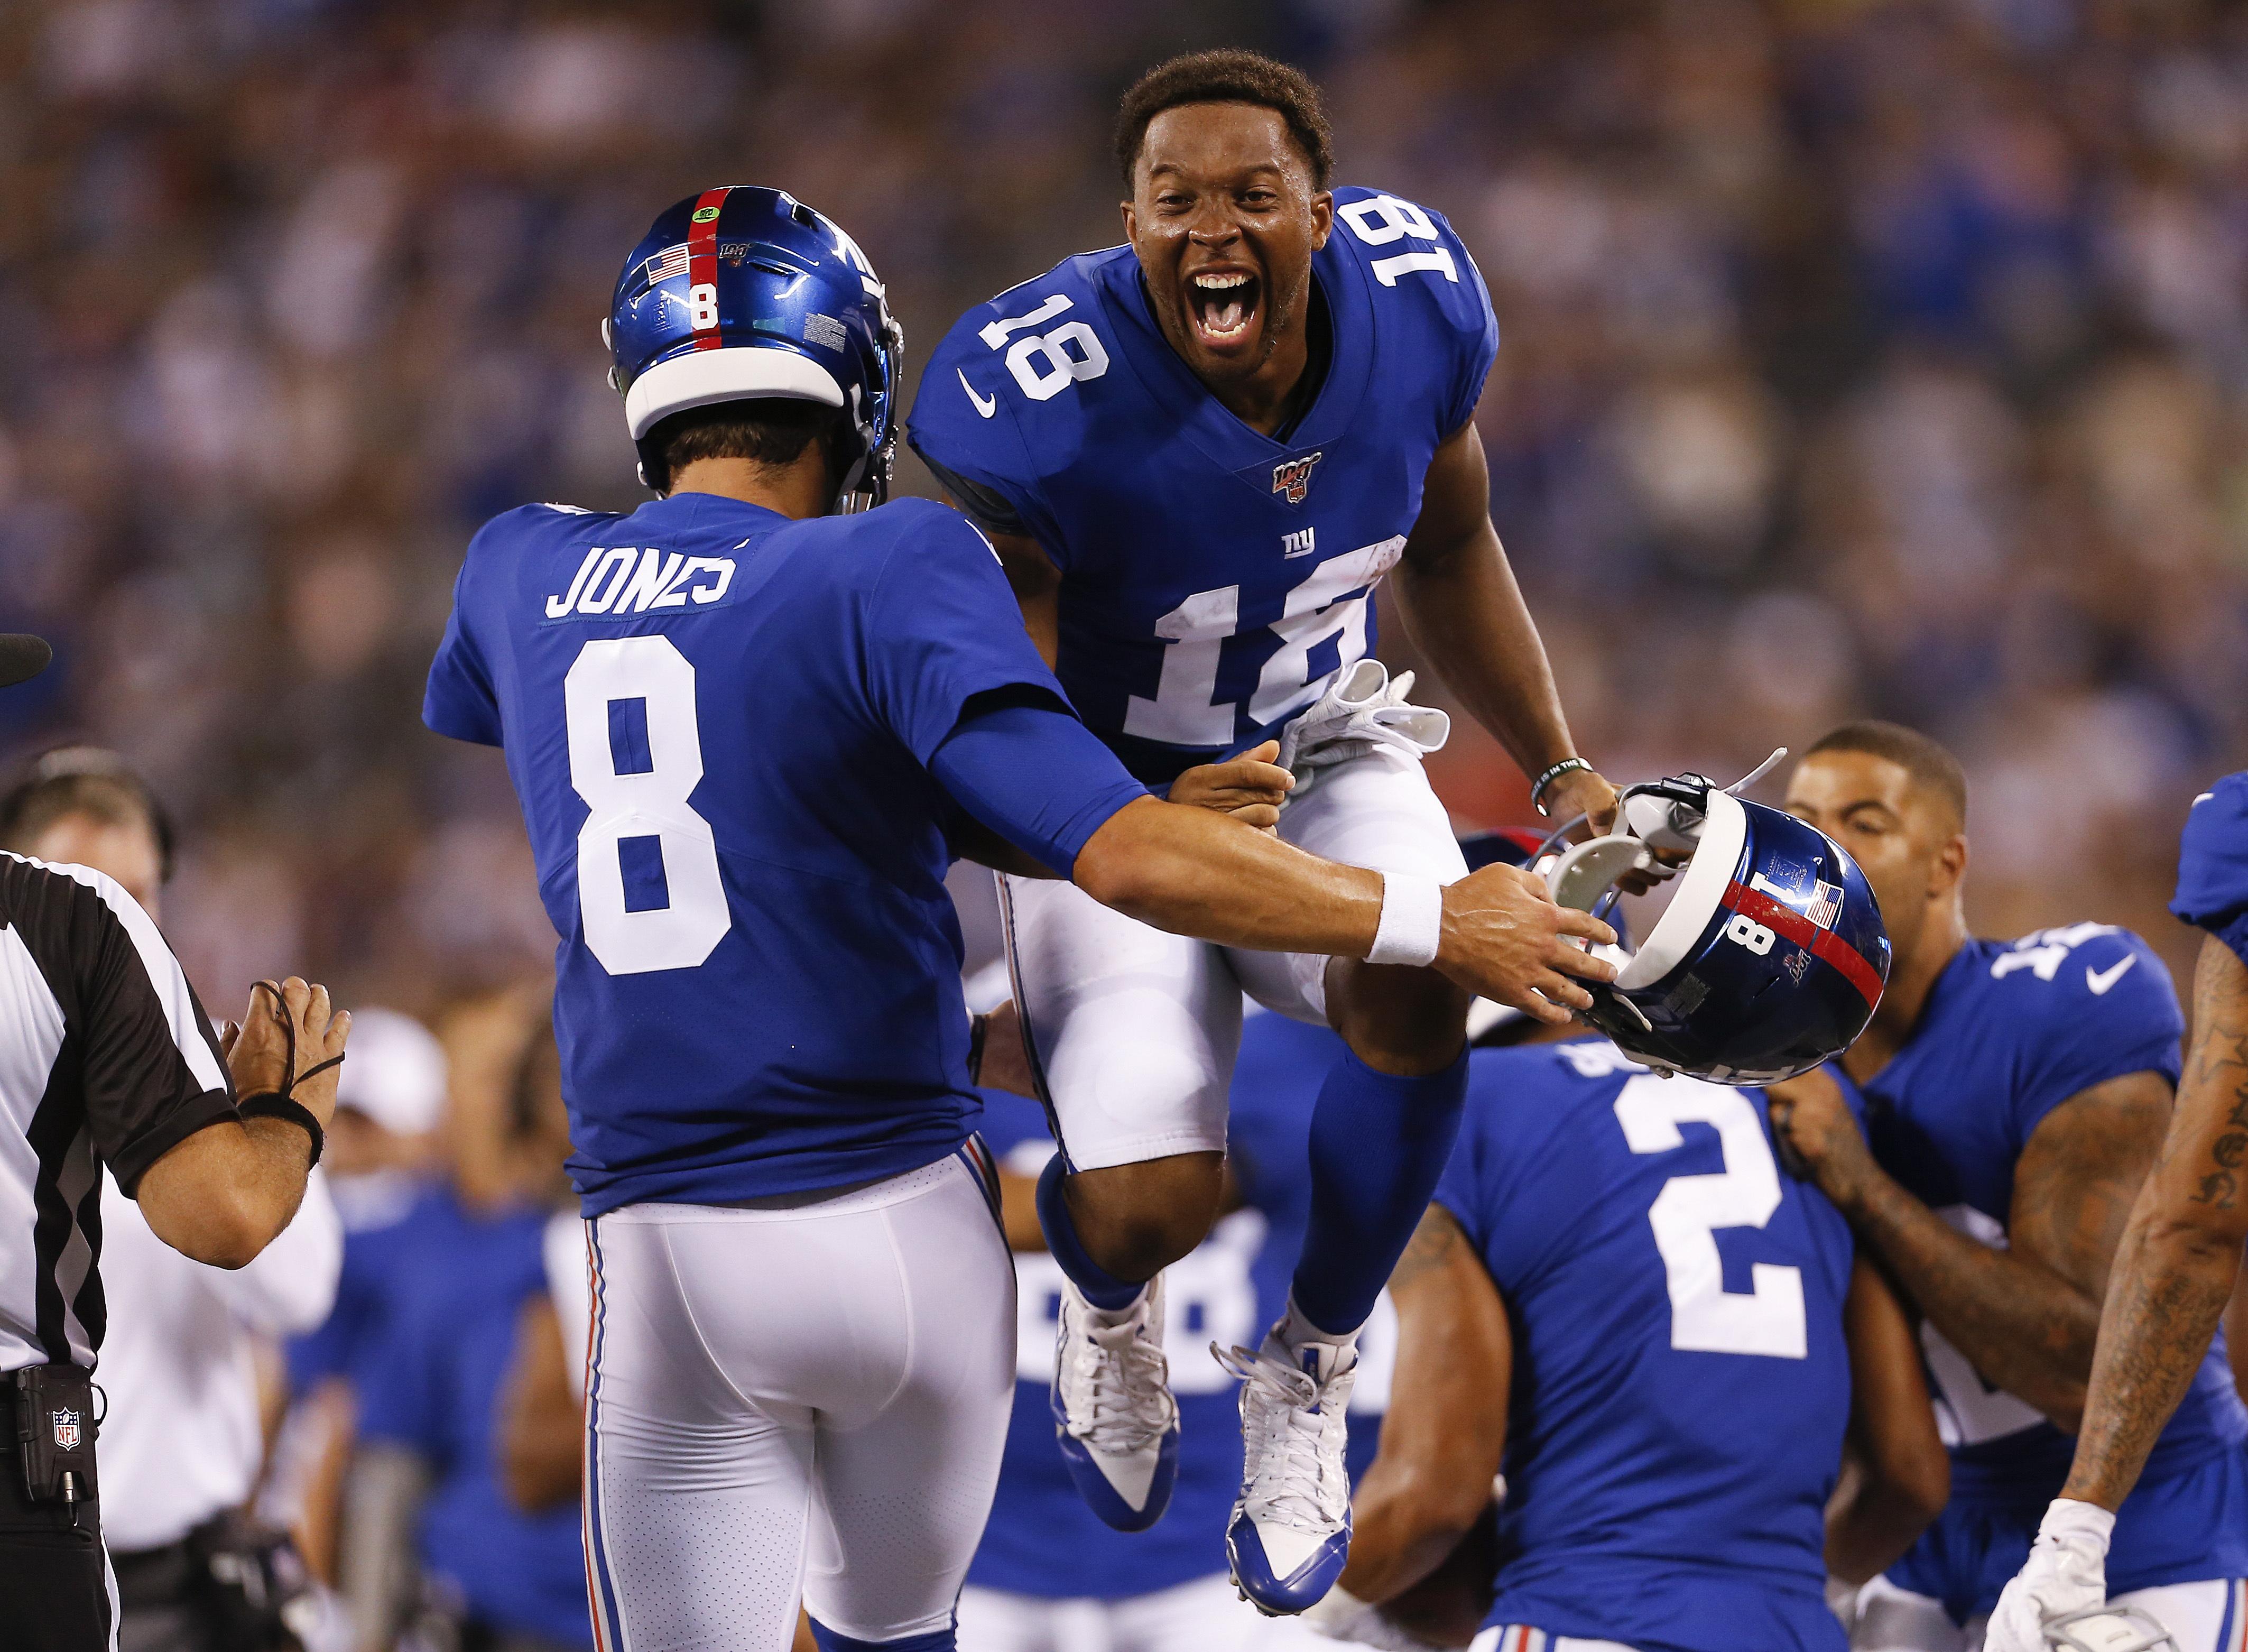 Giants may not have to worry about Eli Manning getting hurt anymore | The Spokesman-Review4253 x 3125